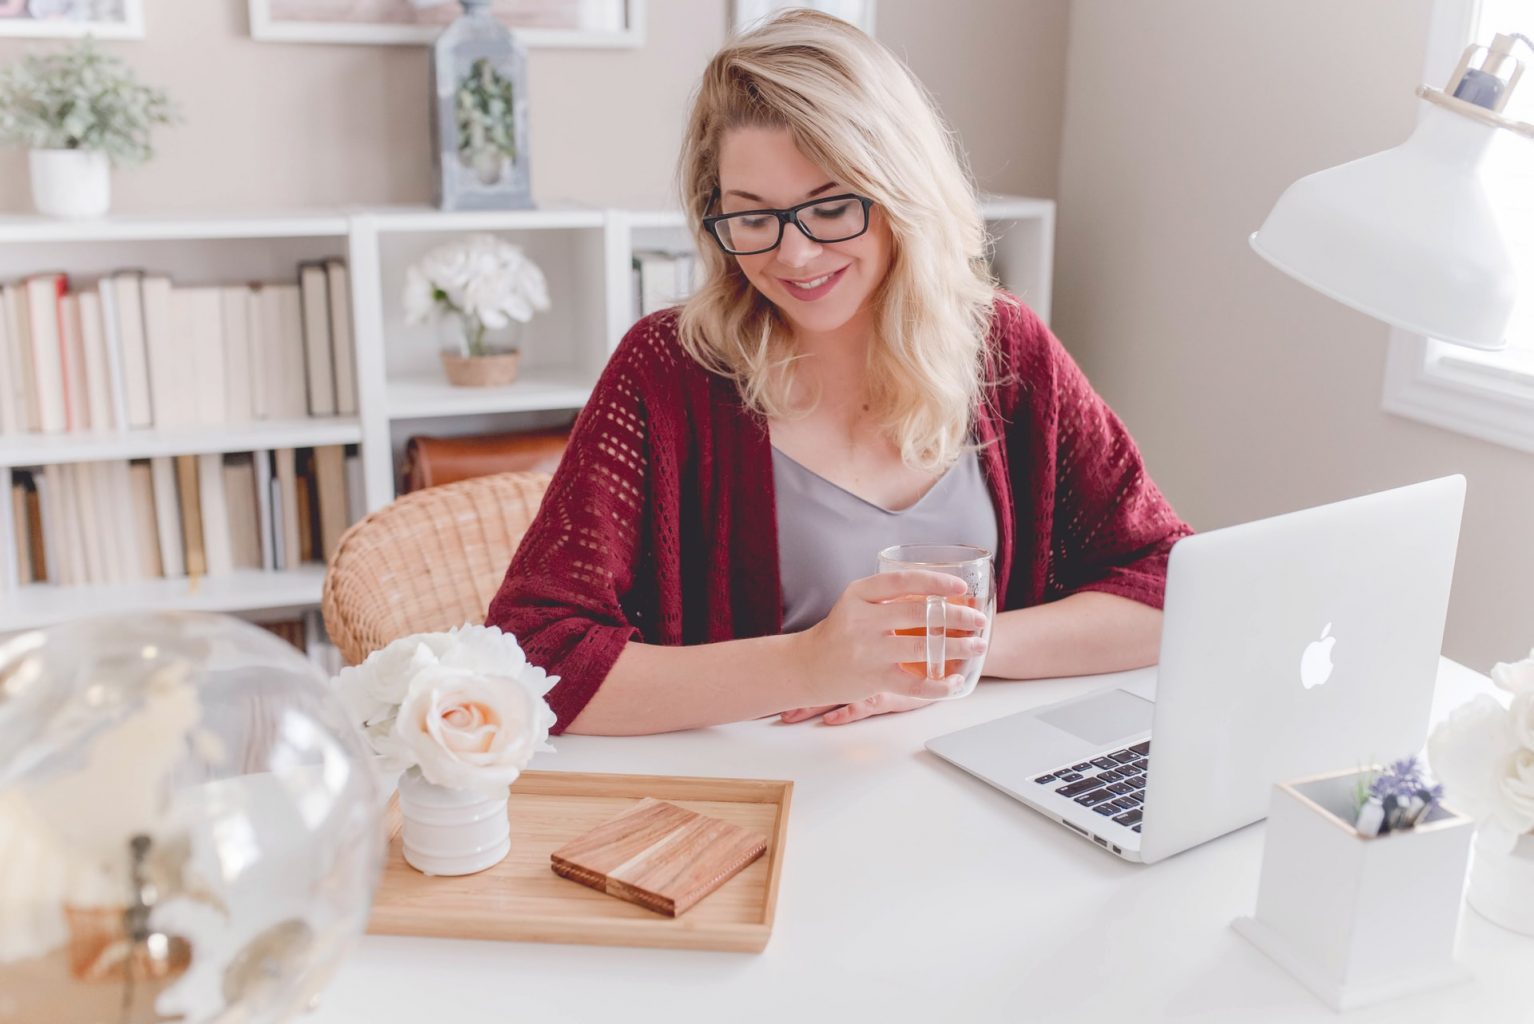 Working from home? 4 Remote Work Tips to Boost Productivity - Comfortable home office - Helppier Blog